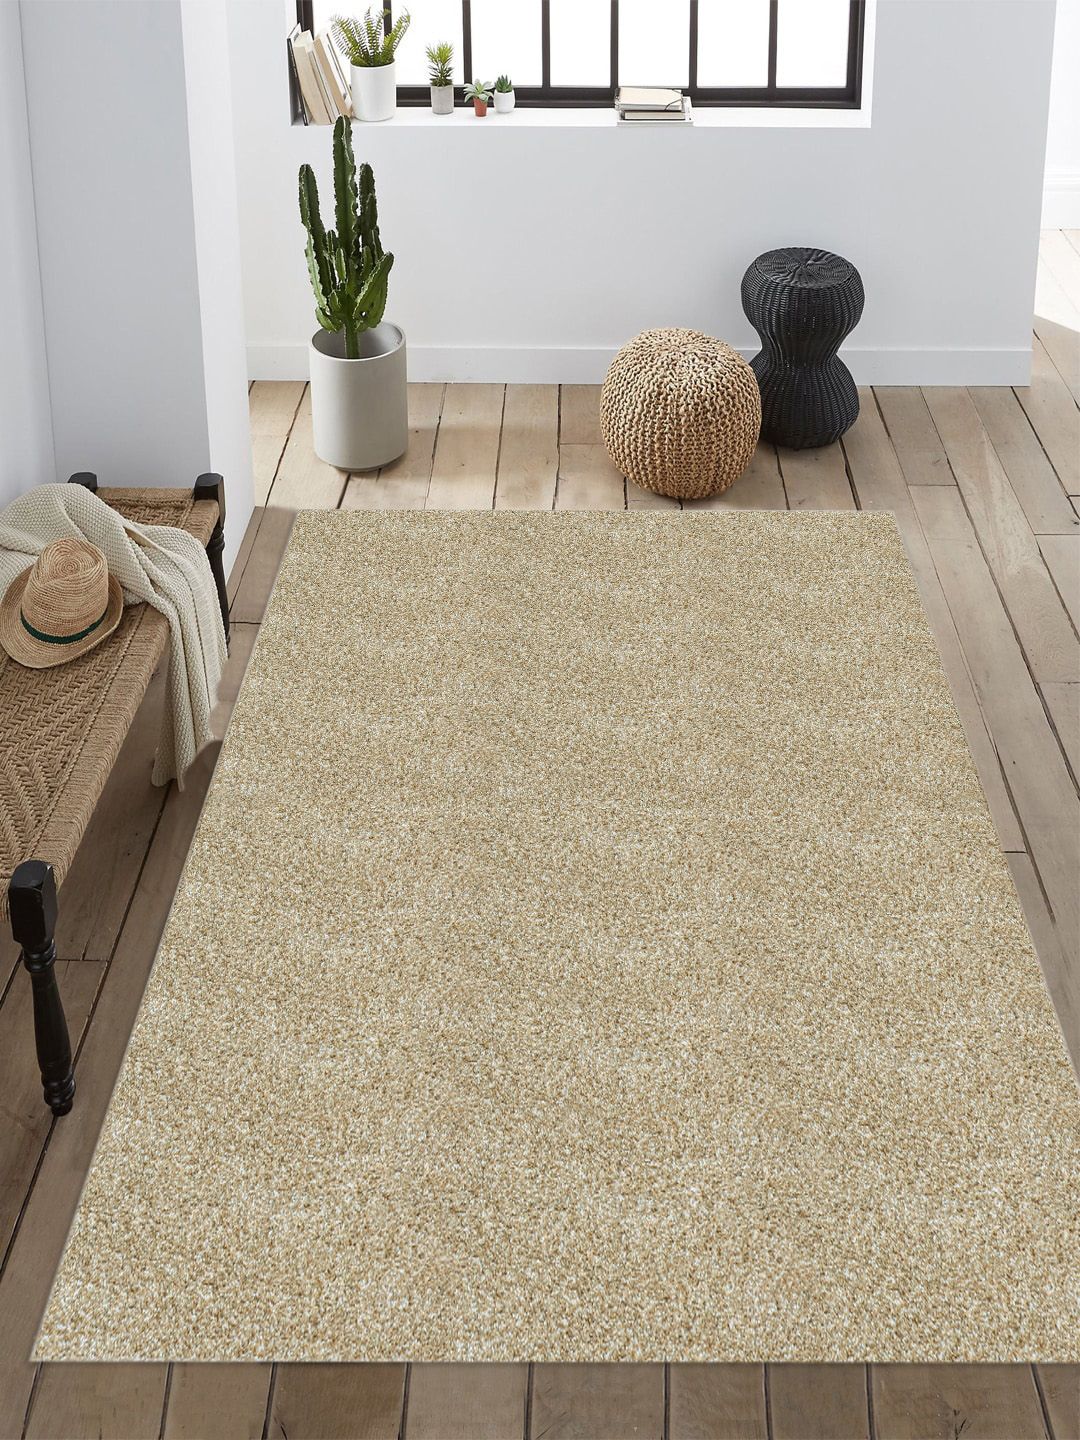 Saral Home Beige Traditional Soft Shaggy Carpet Price in India